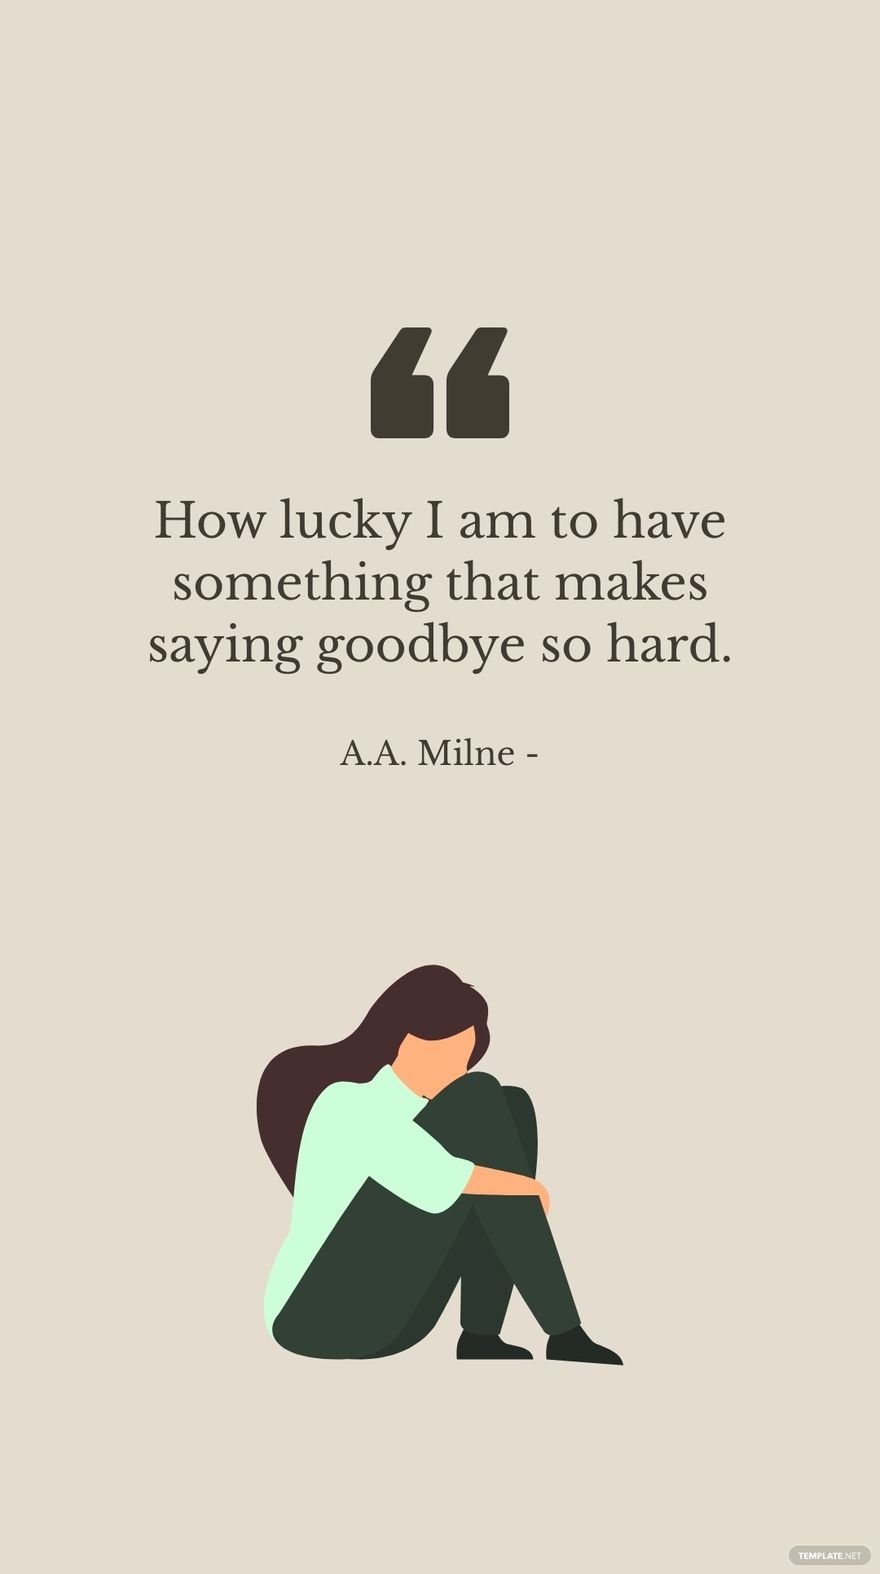 Free A.A. Milne - How lucky I am to have something that makes saying goodbye so hard. in JPG